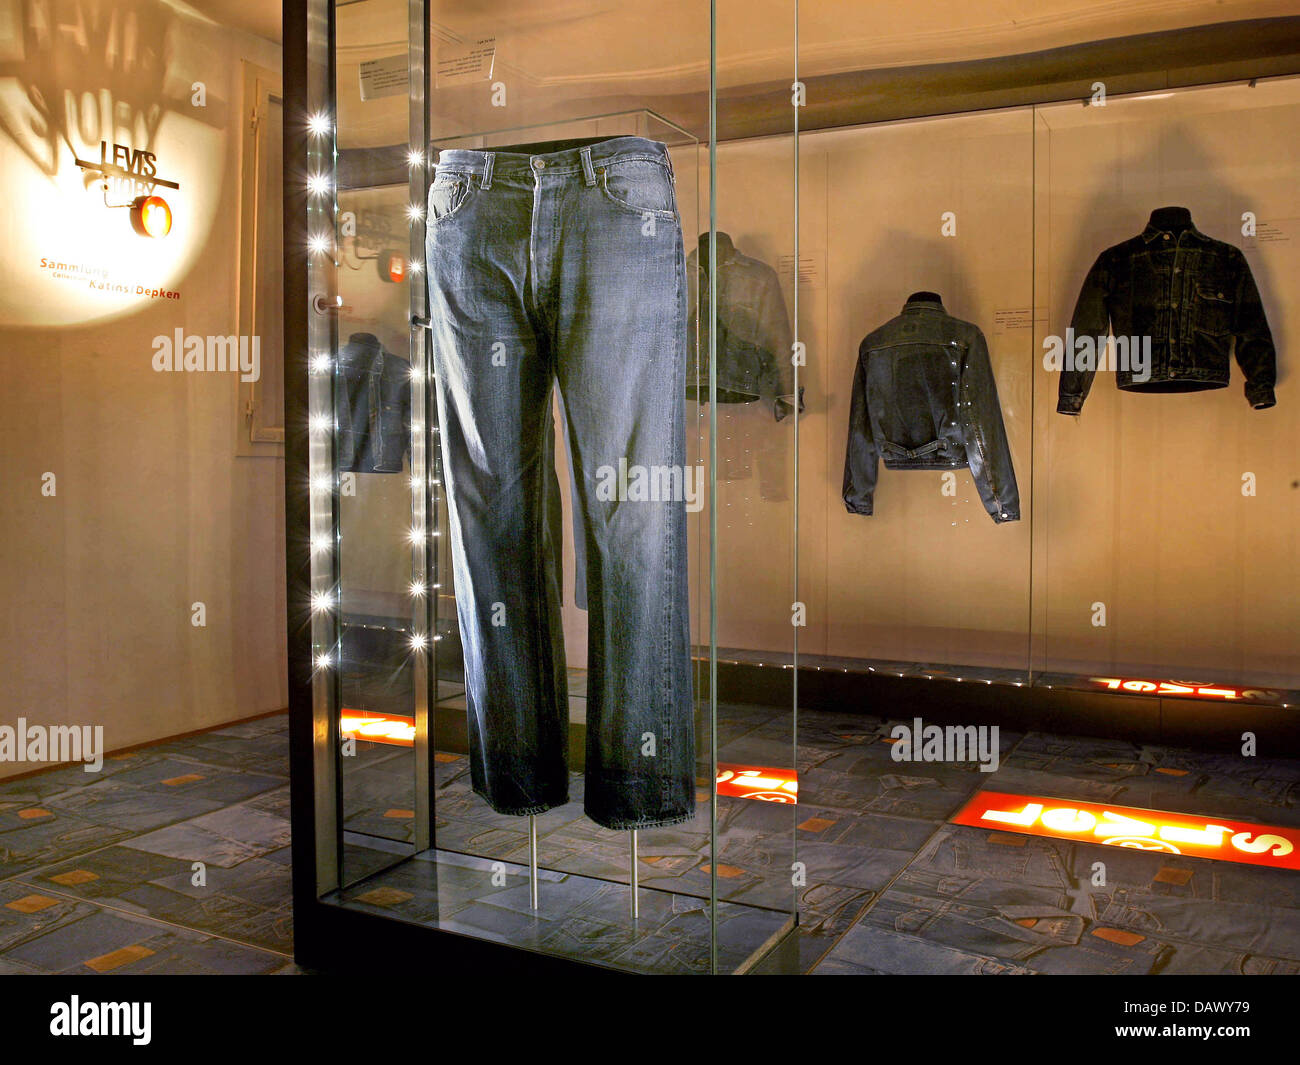 Levi Strauss Museum High Resolution Stock Photography and Images - Alamy